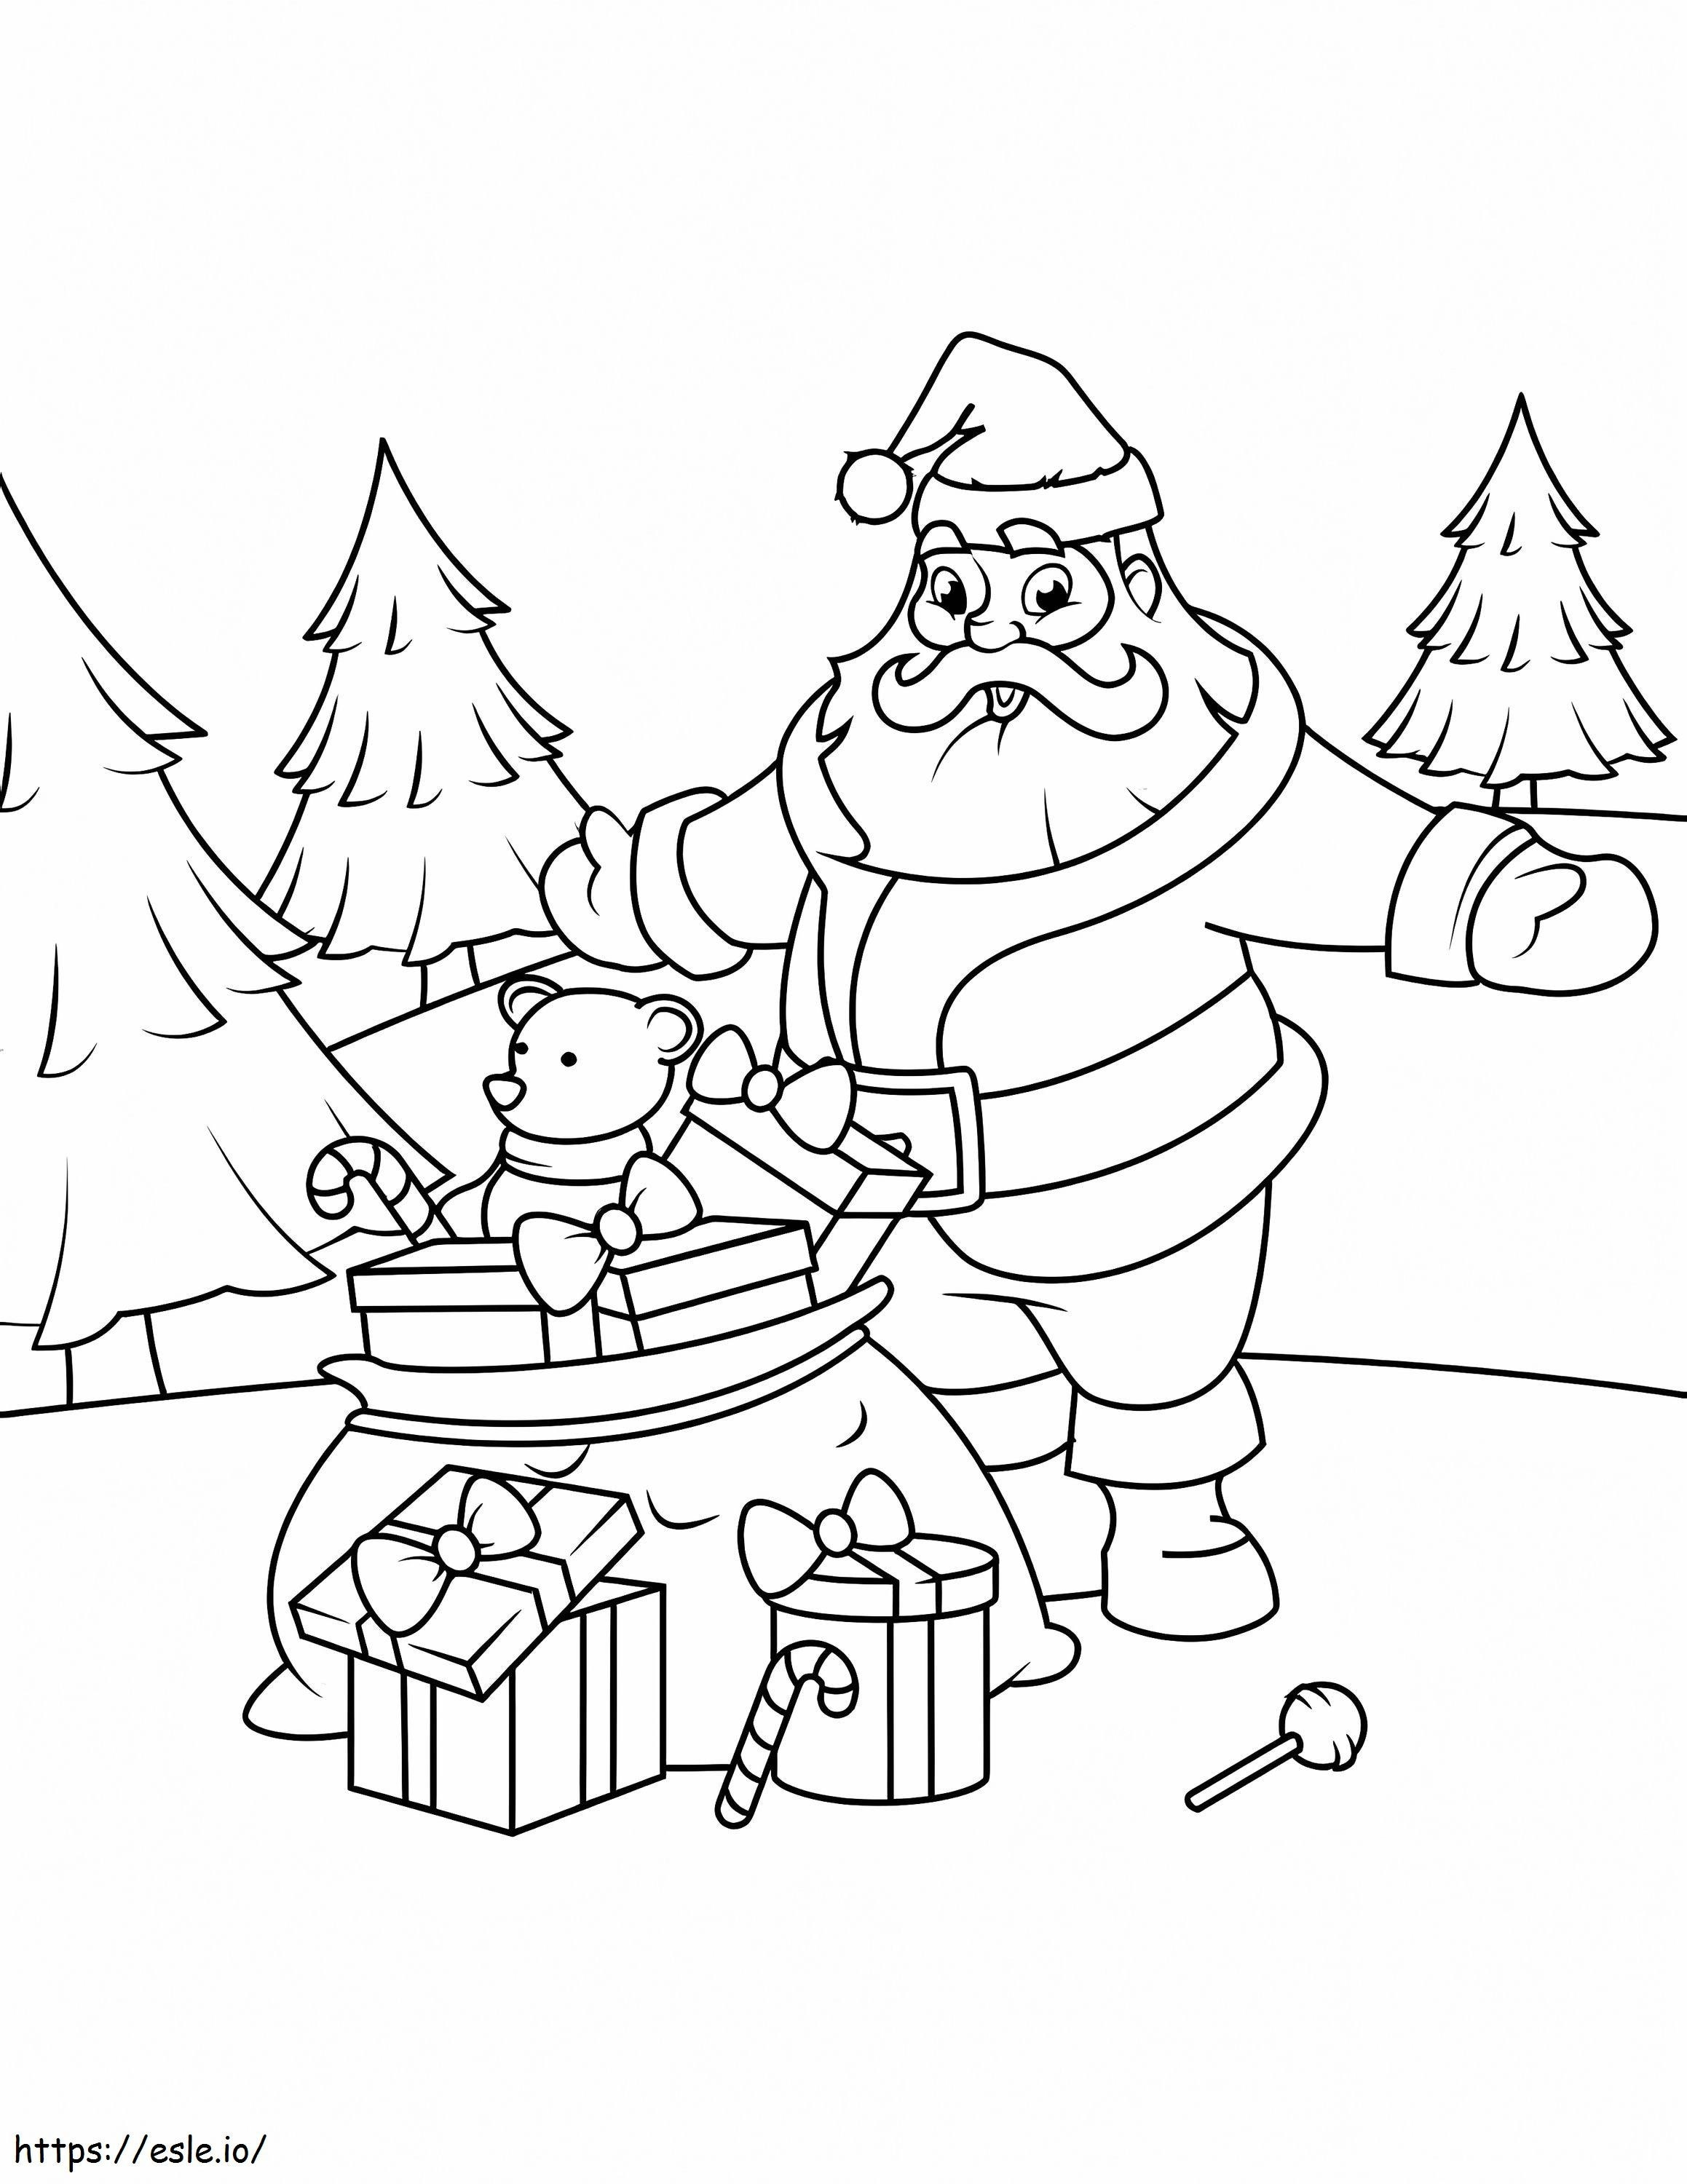 Santa Claus And All His Gifts coloring page